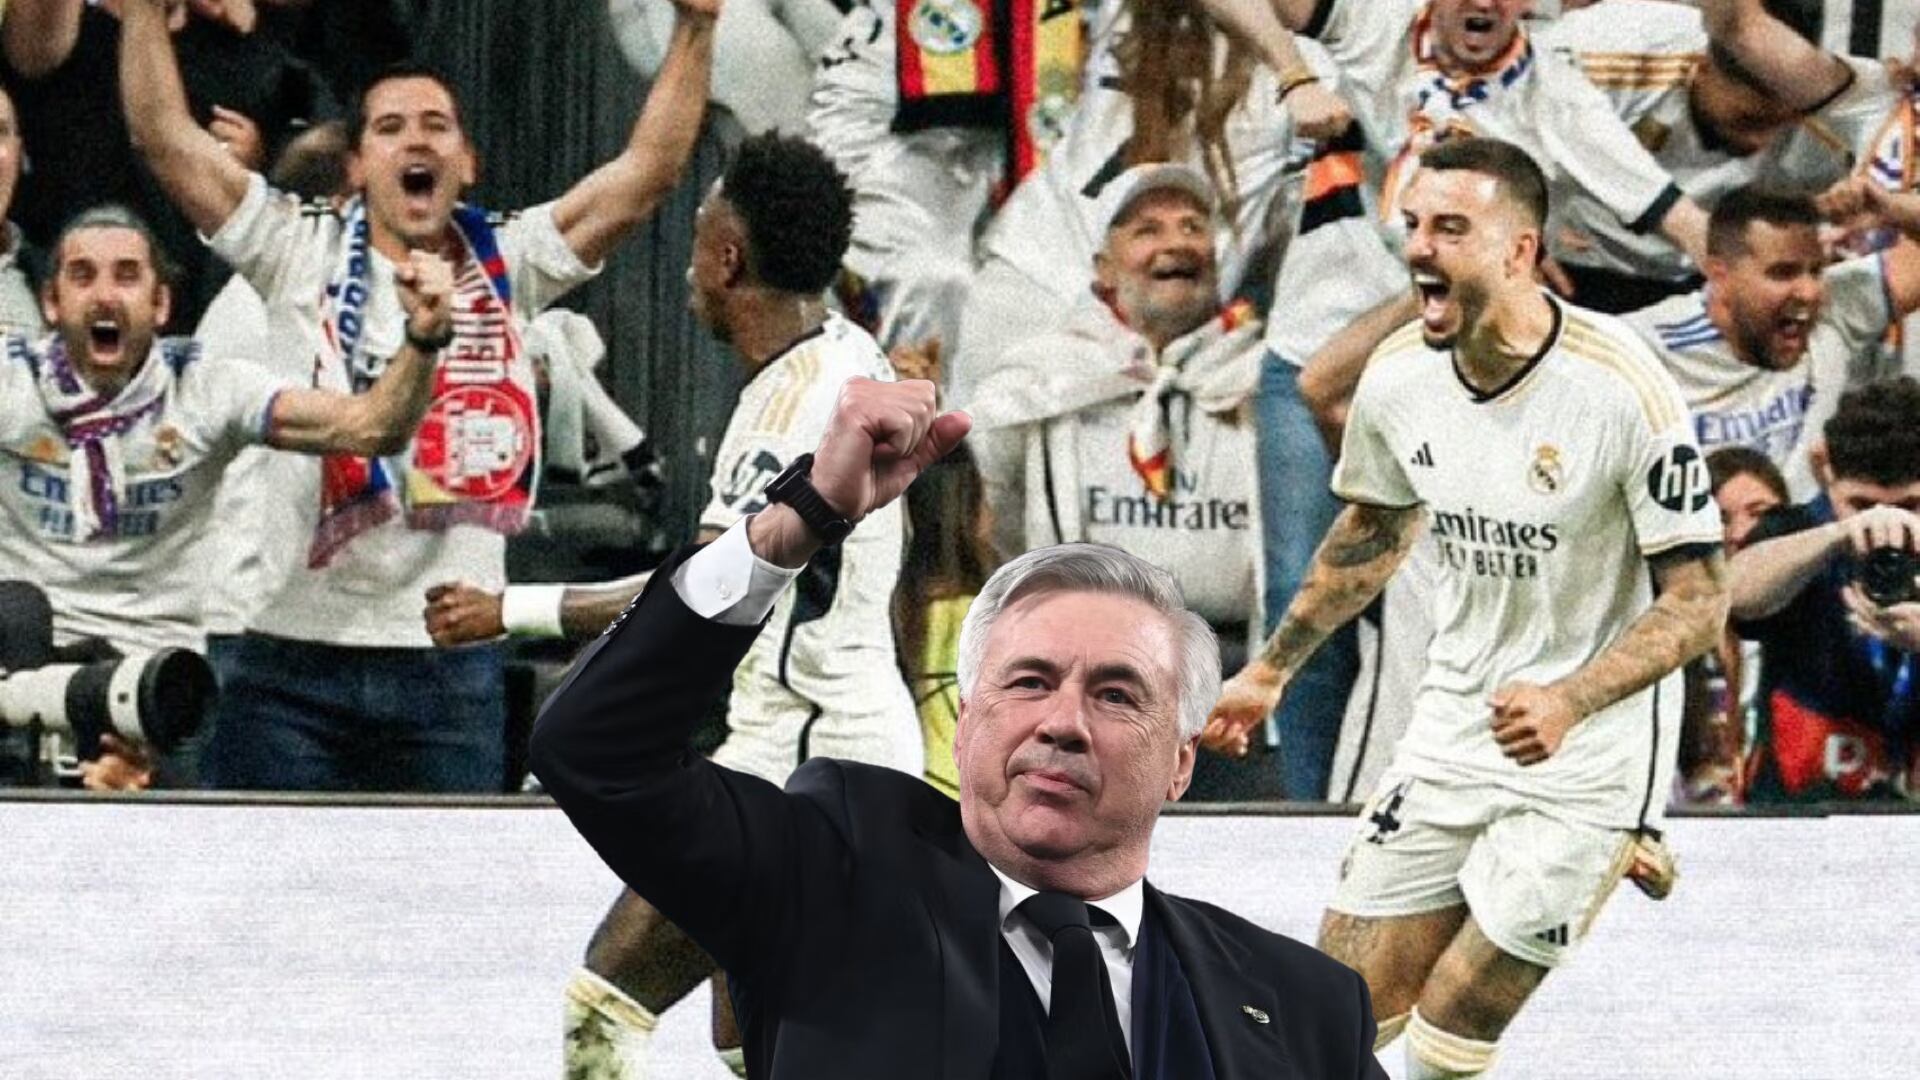 (VIDEO) Real Madrid is in the Champions League final after beating Bayern, the most euphoric celebration of Ancelotti